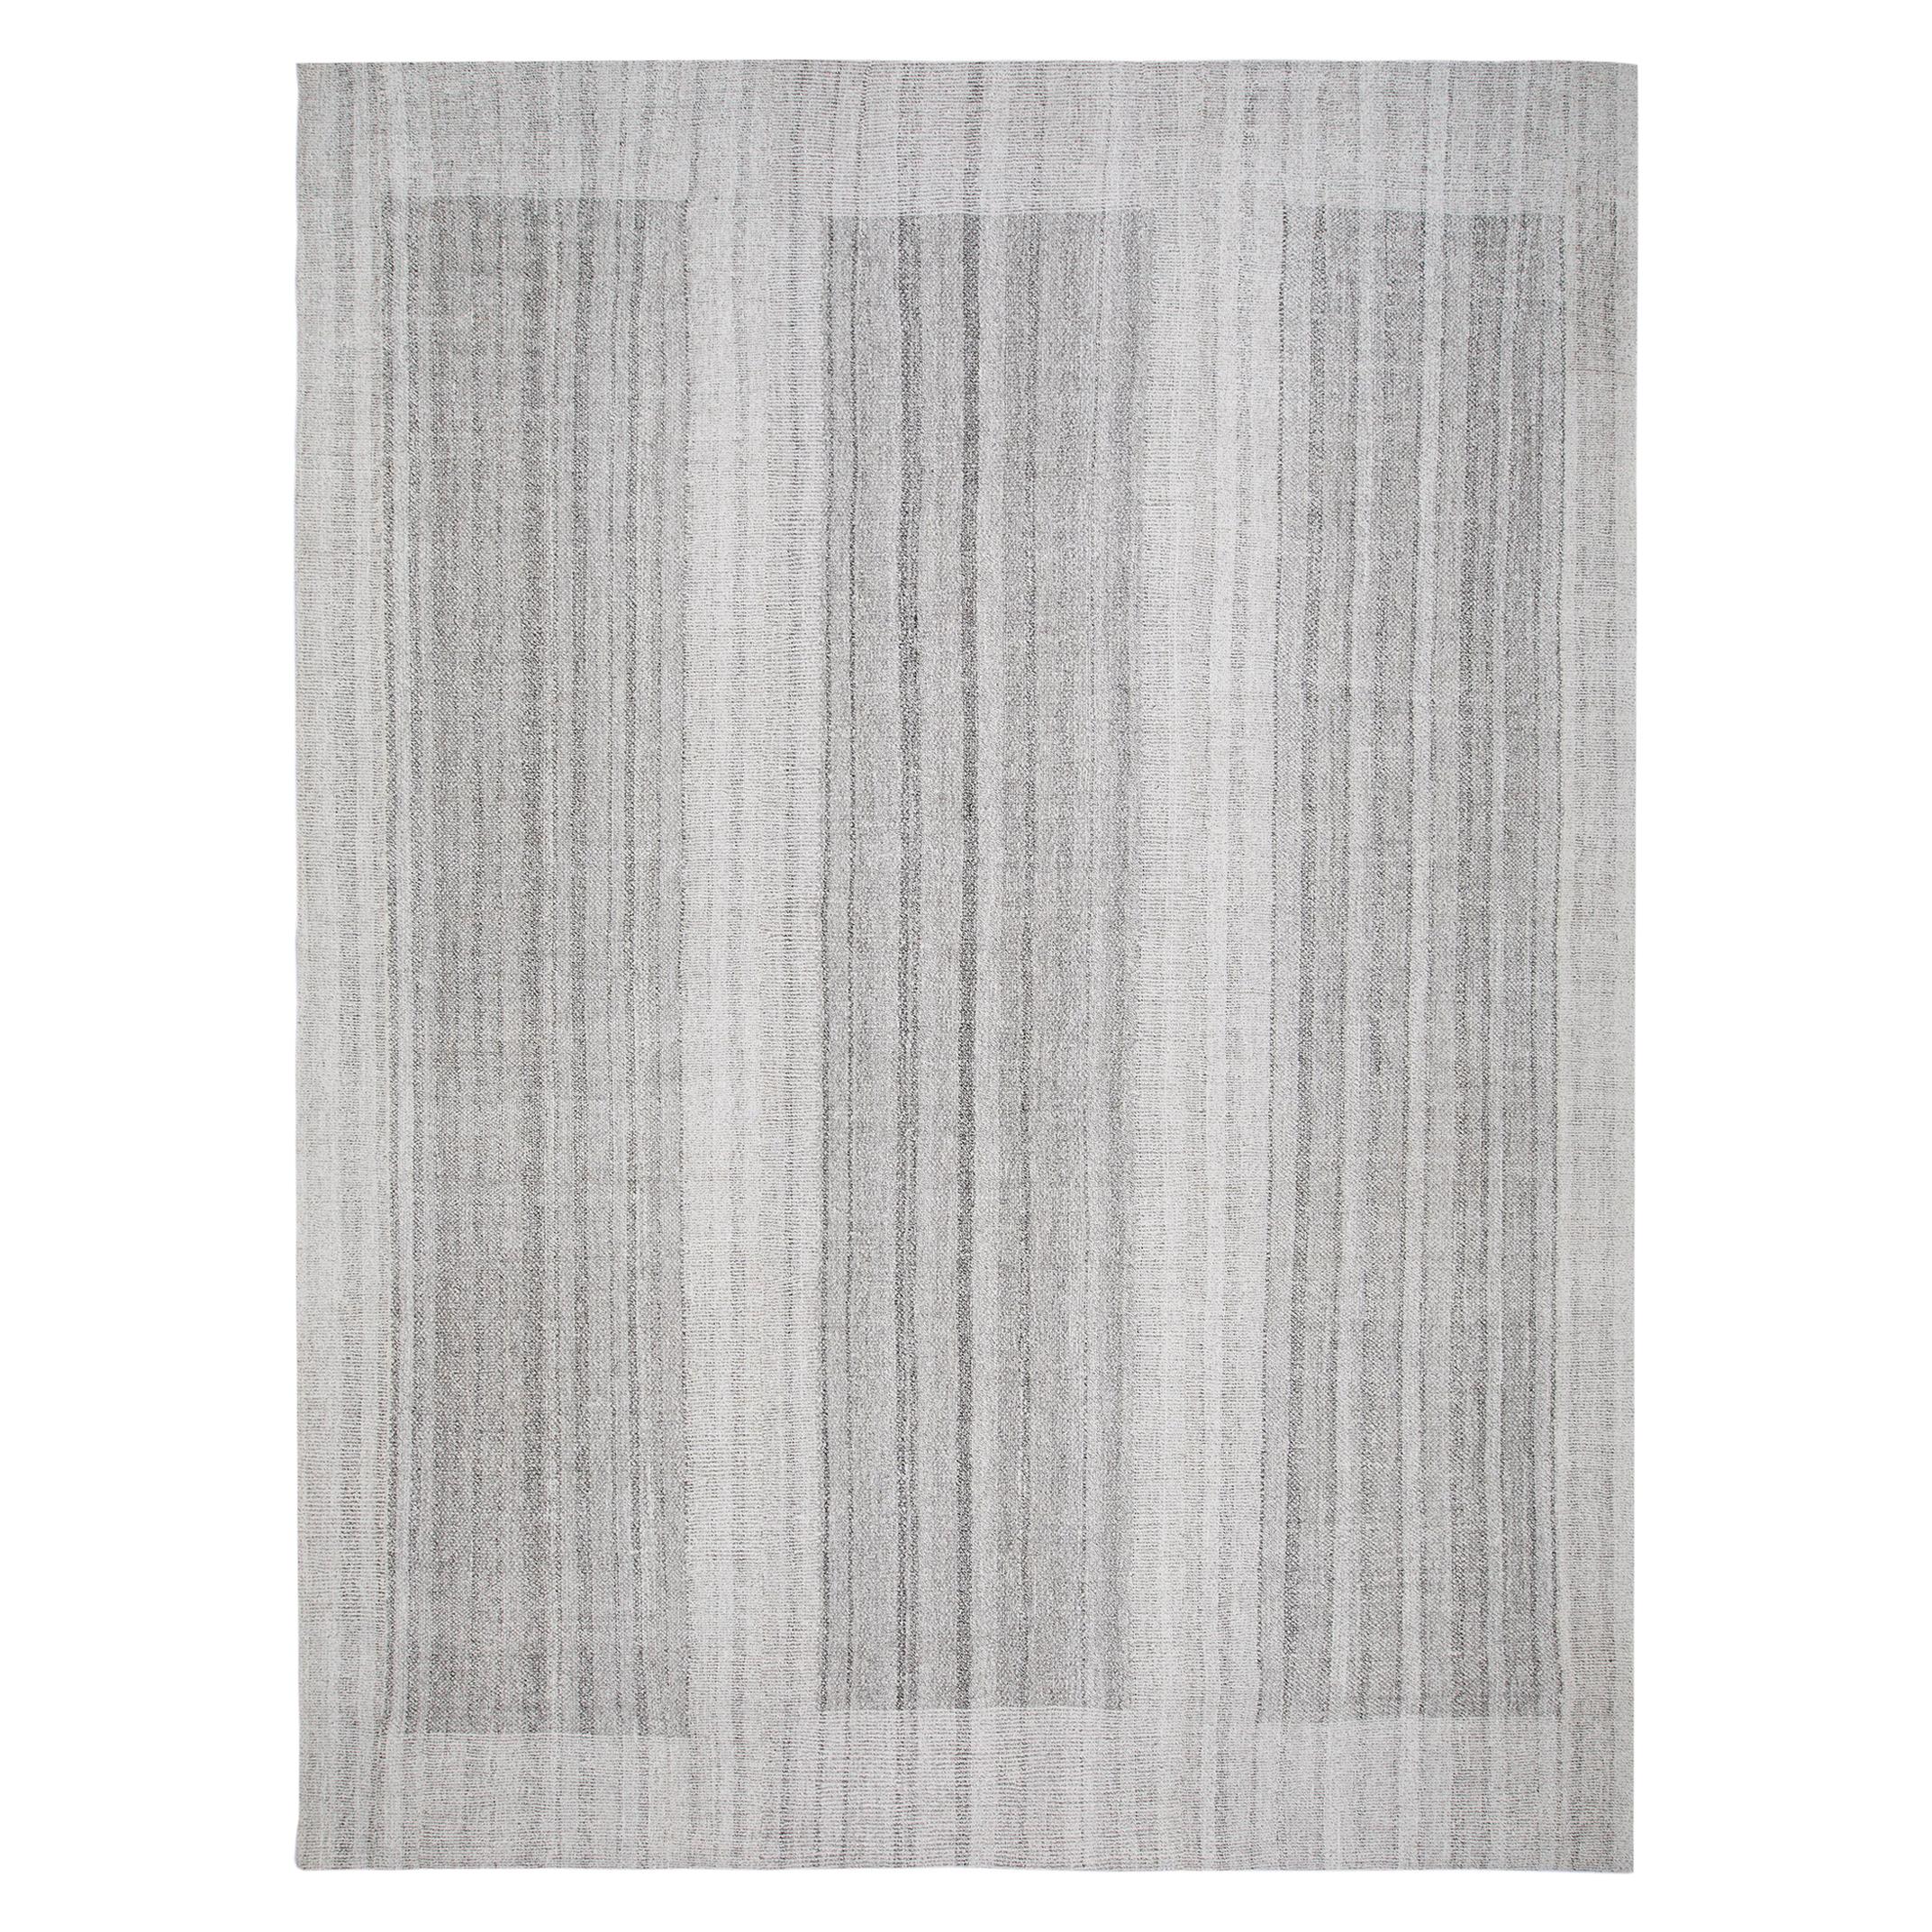 Unique Modern Handwoven Flat-Weave Textured Rug in Shades of Grey